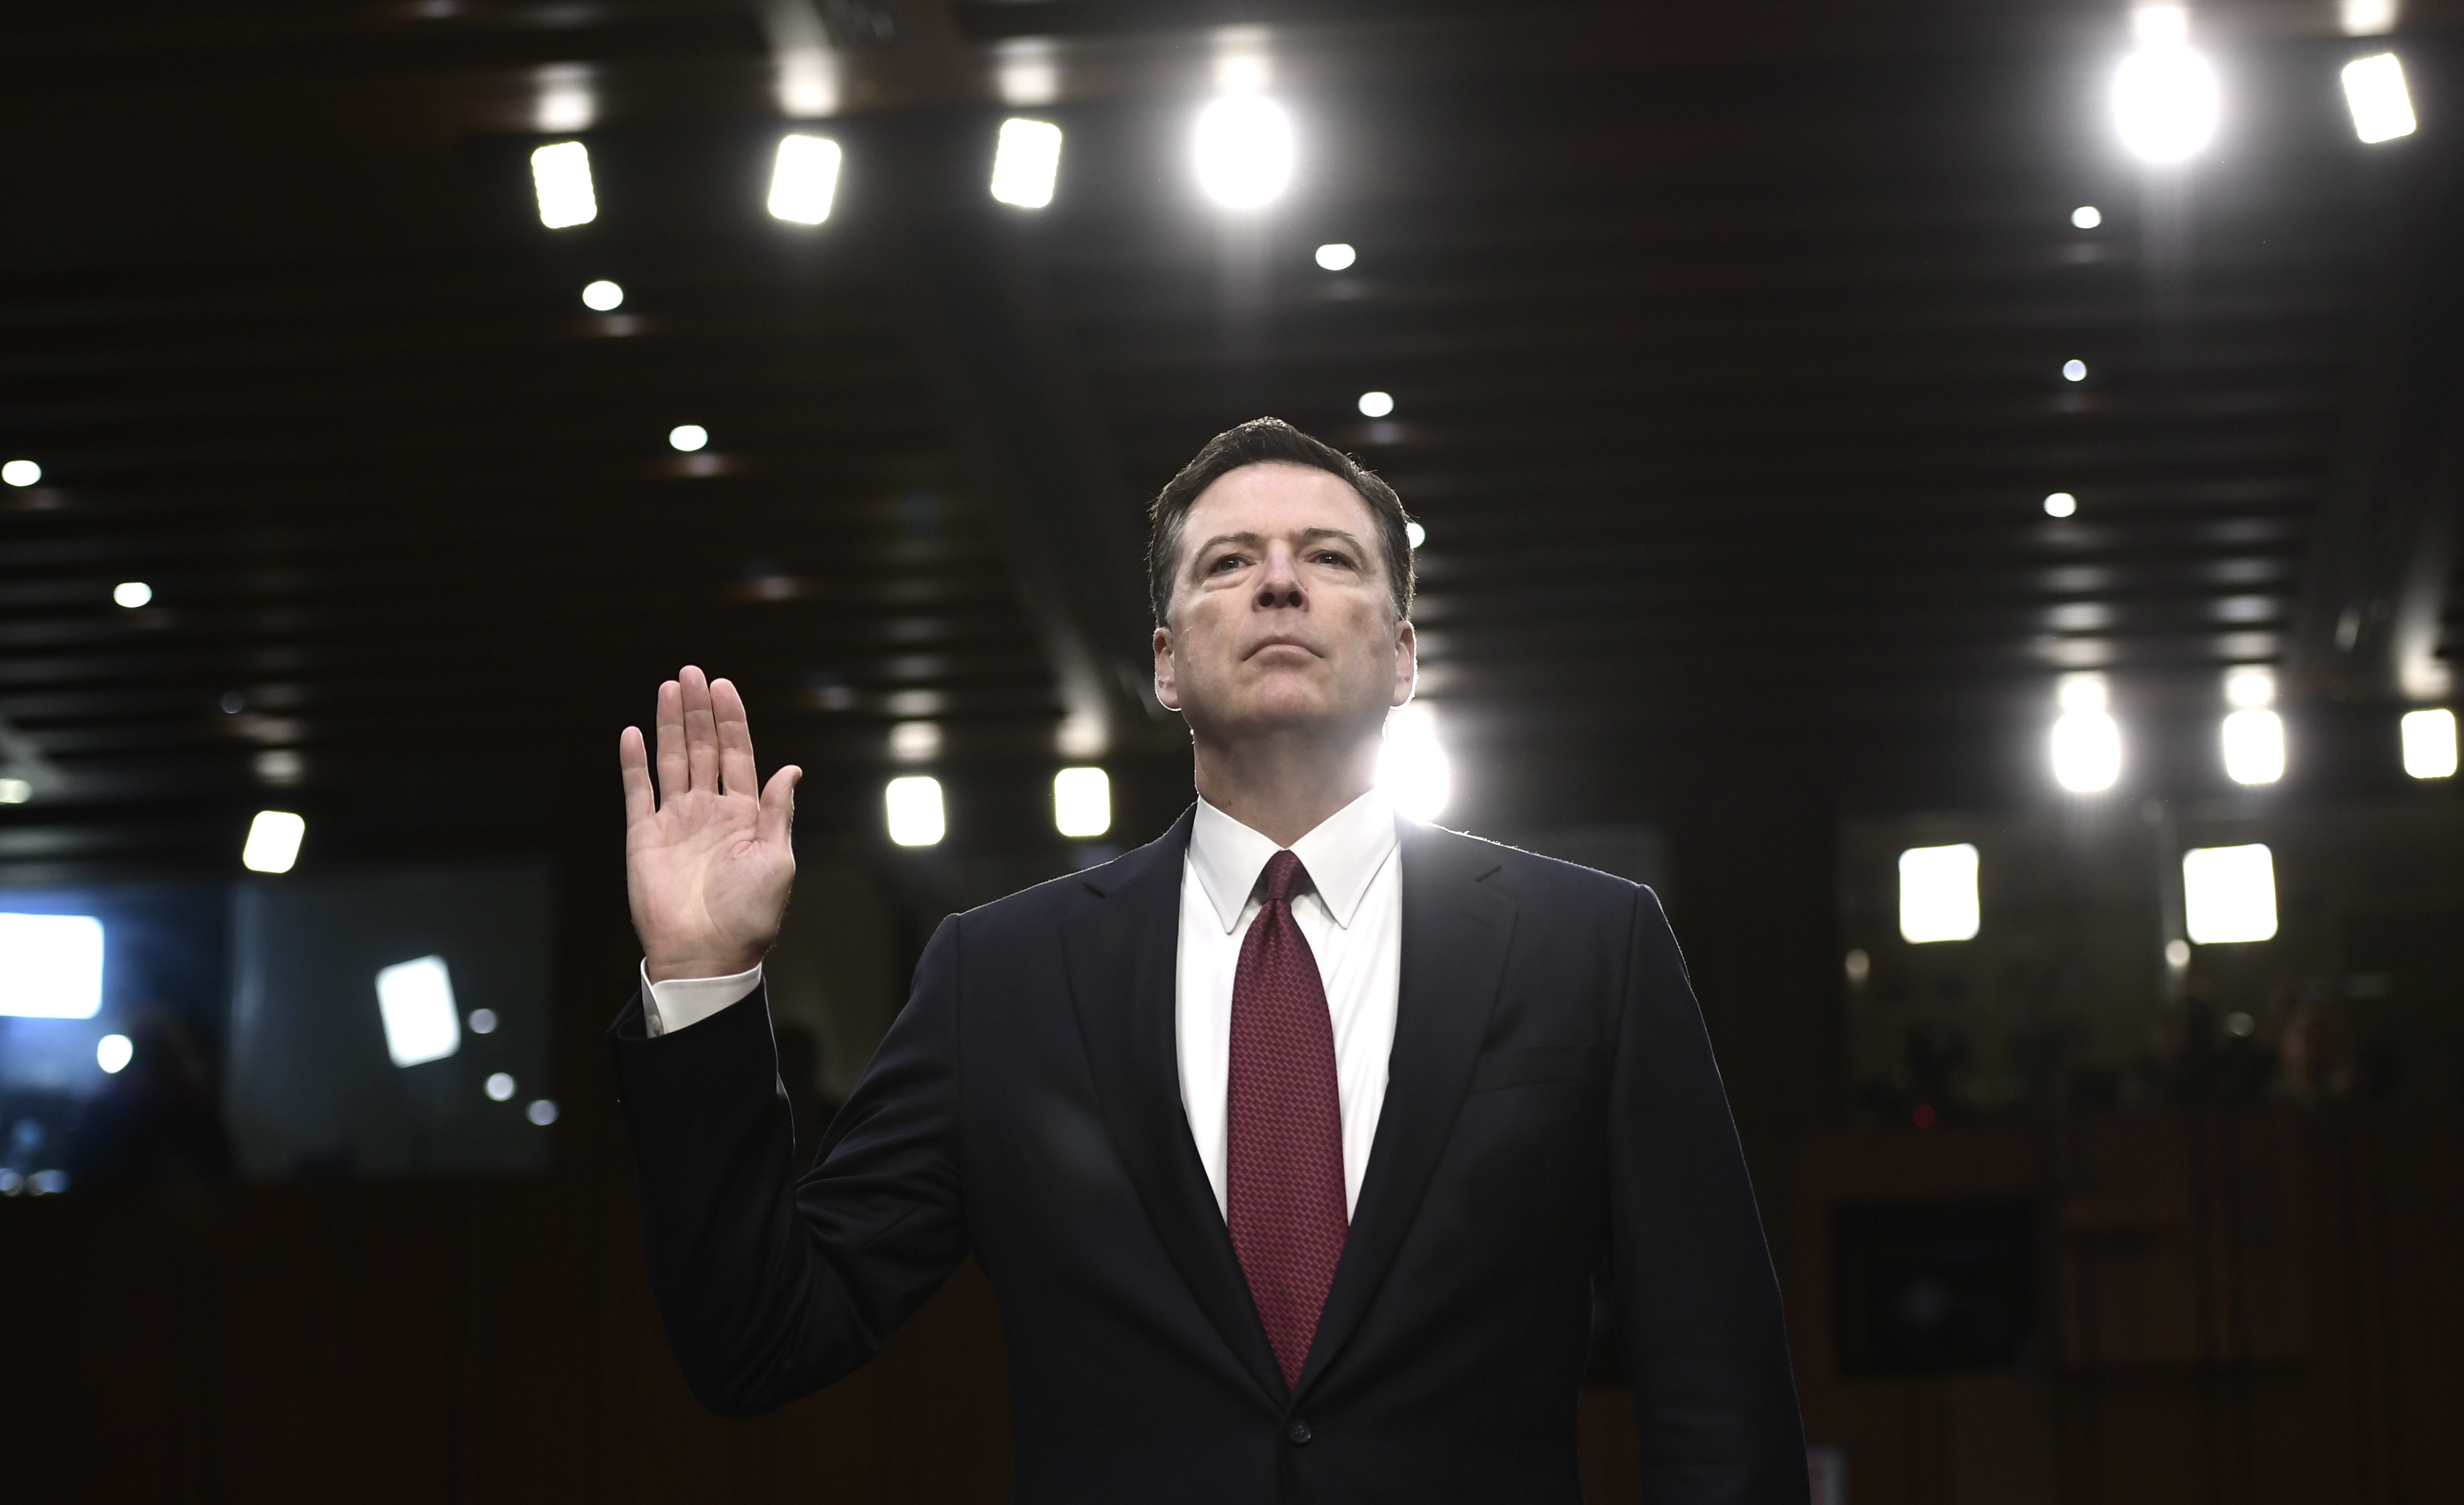 Former FBI Director James Comey takes the oath before testifying to the Senate Intelligence Committee.